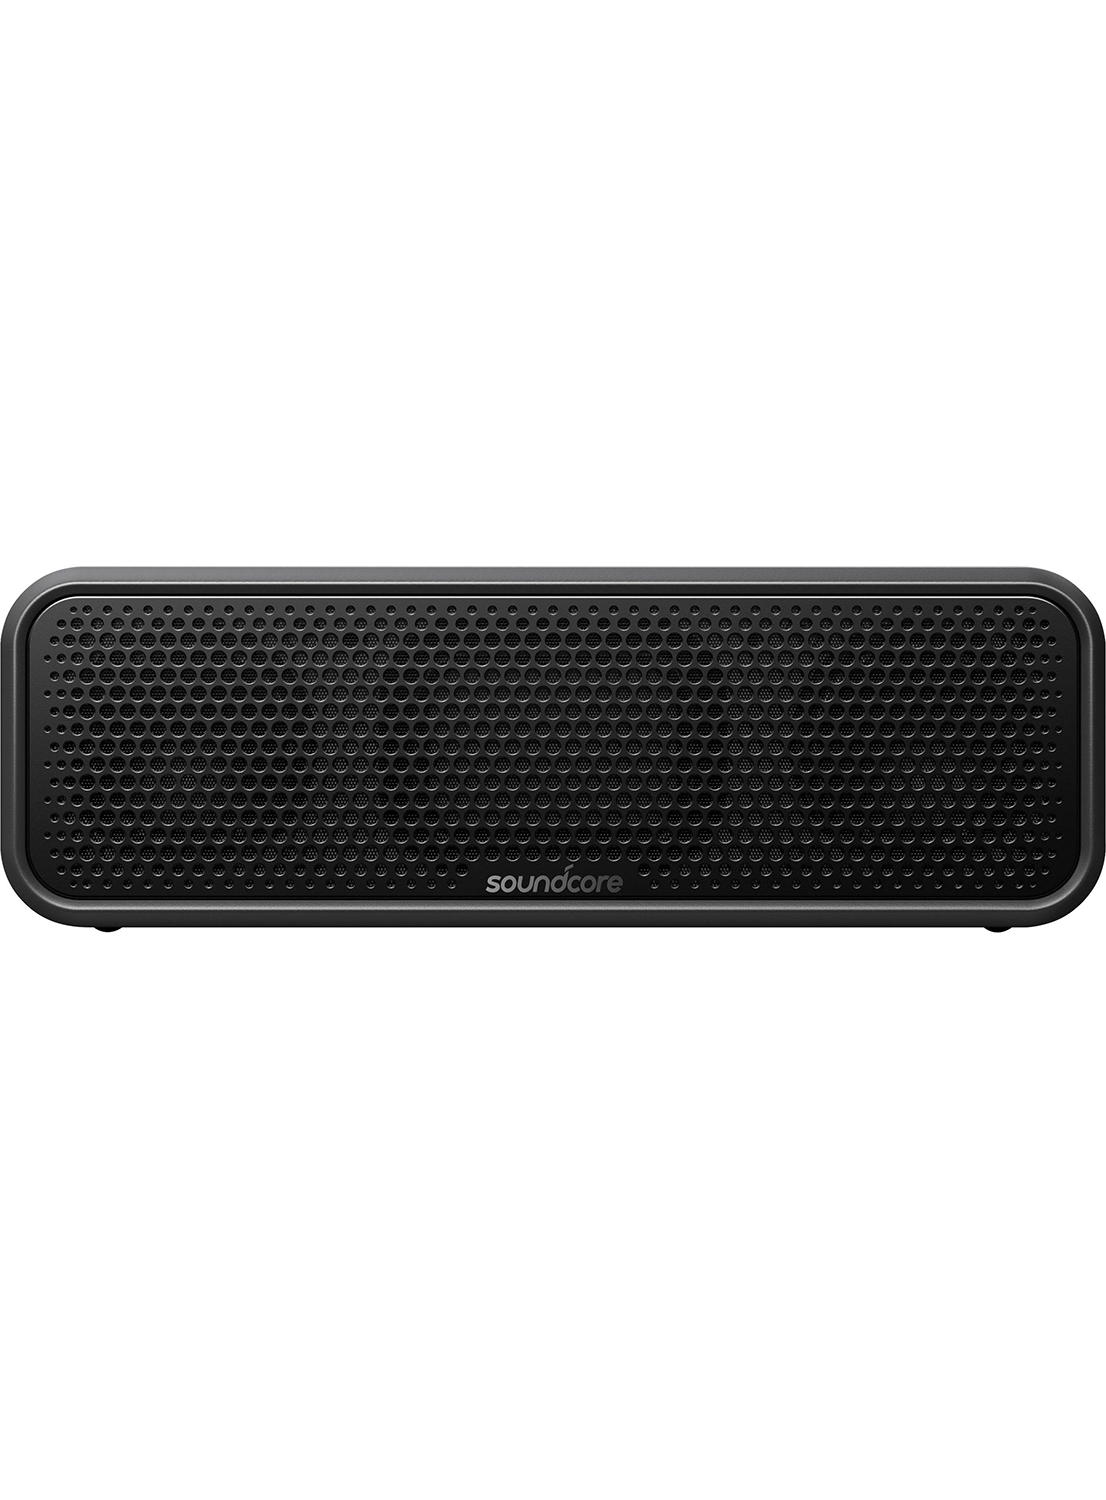 ANKER Soundcore Select 2 A3125 Bluetooth Speaker